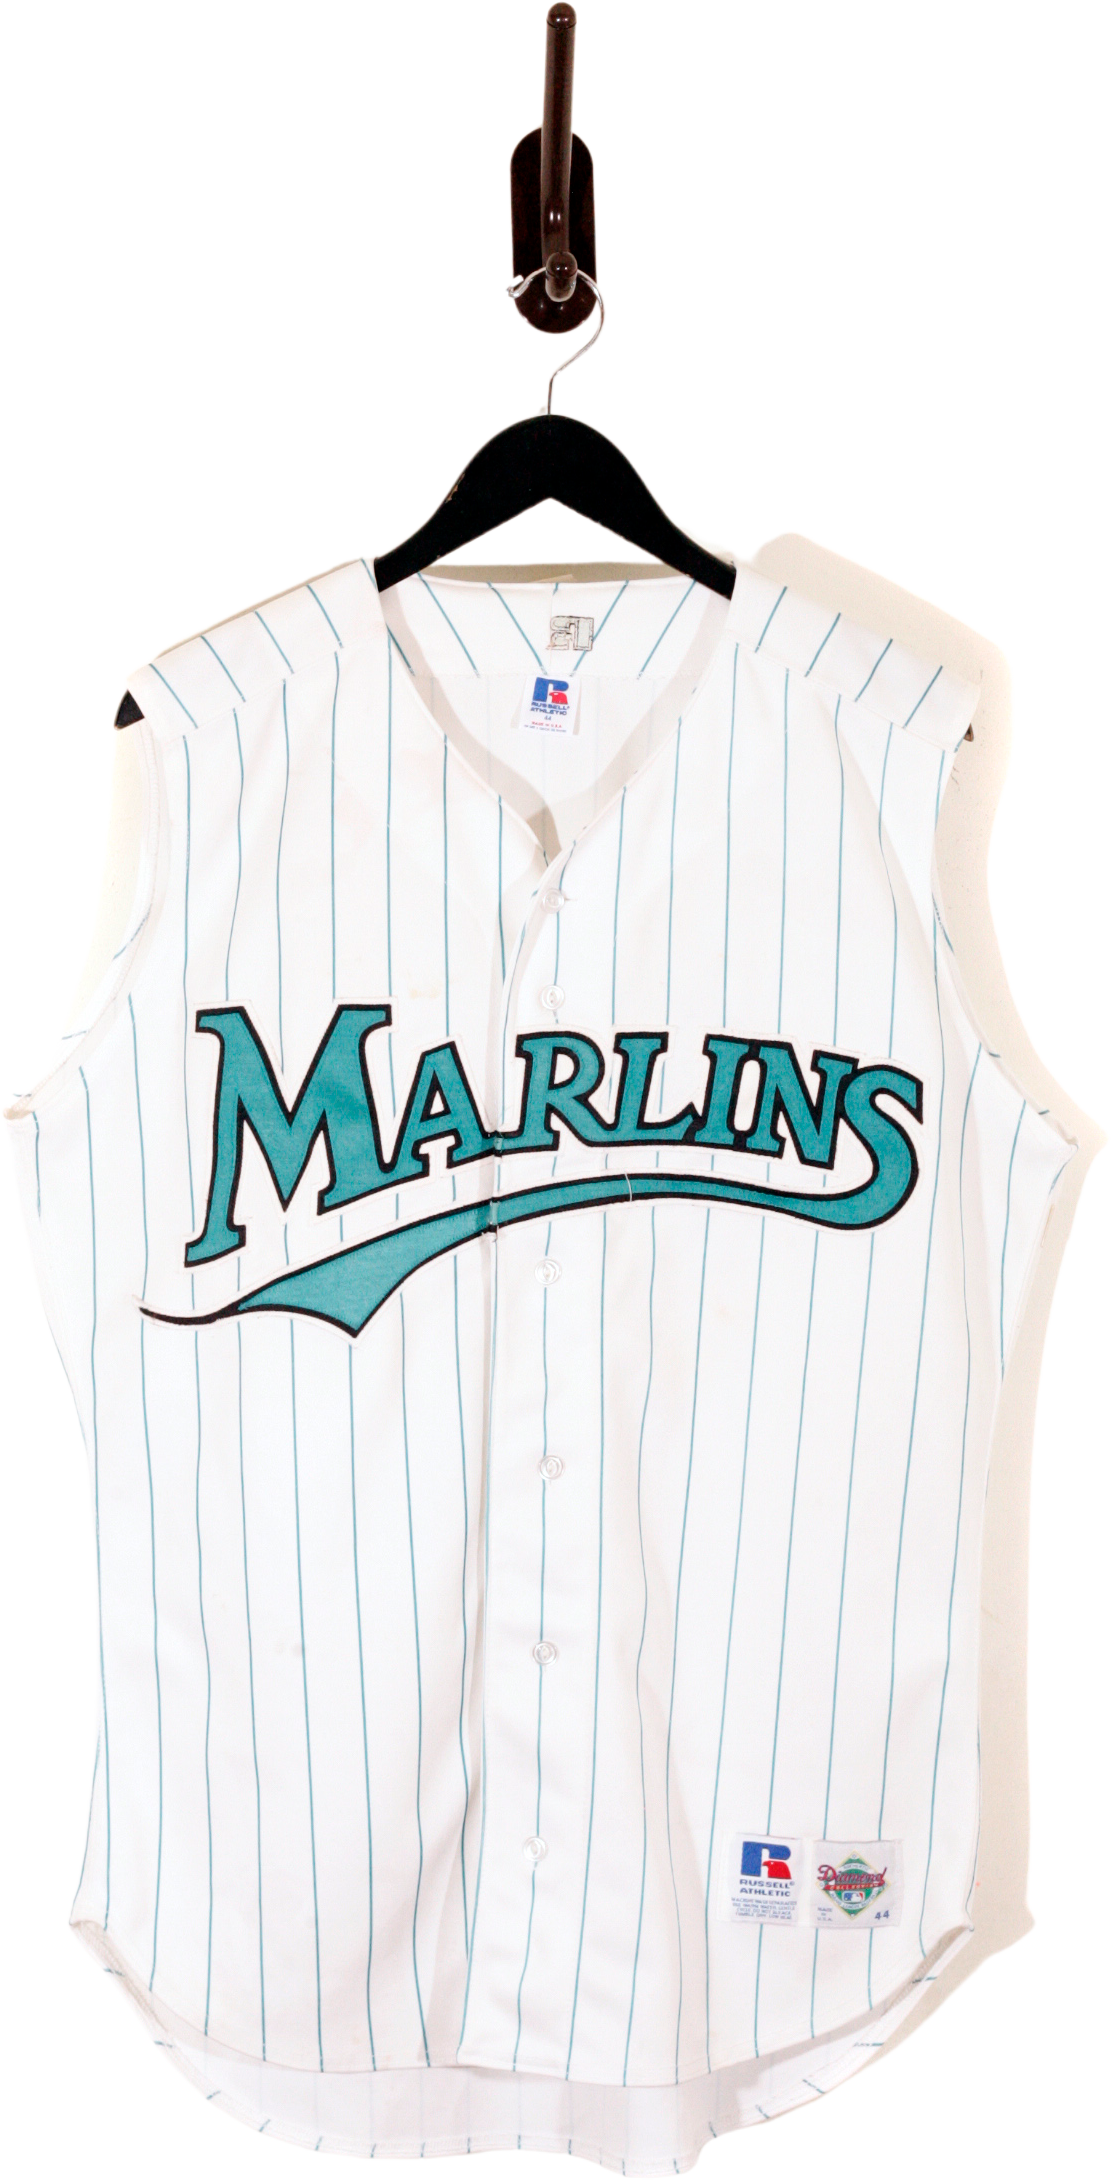 Vintage 90s Florida Marlins Mlb Baseball Sleeveless Jersey 44 By Russell  Athle